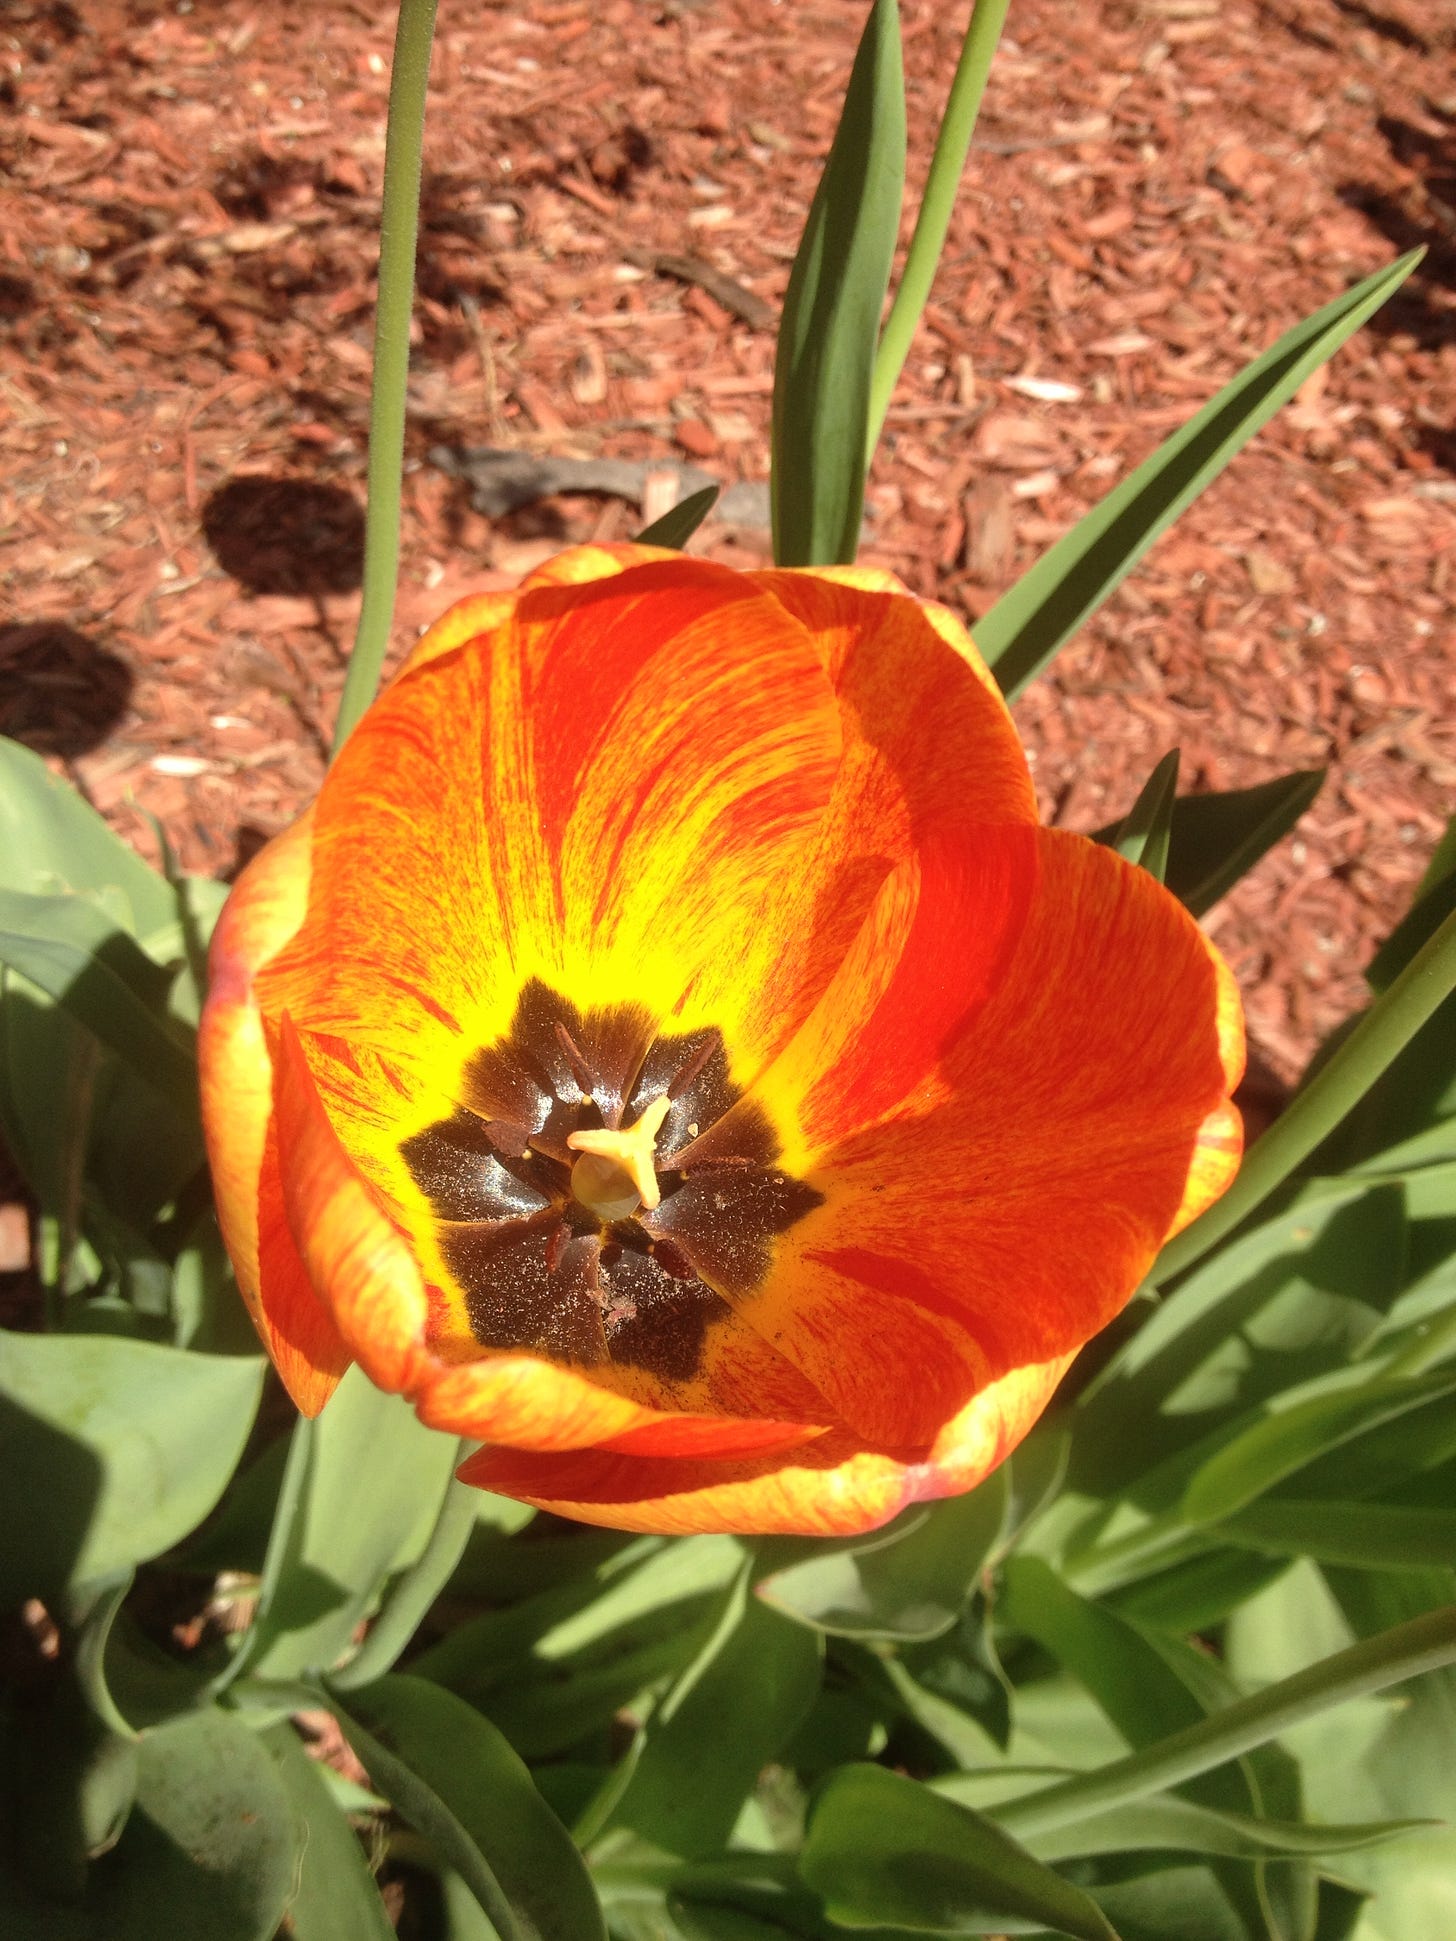 A picture of the interior of a vibrant orange-and-yellow-striped tulip.